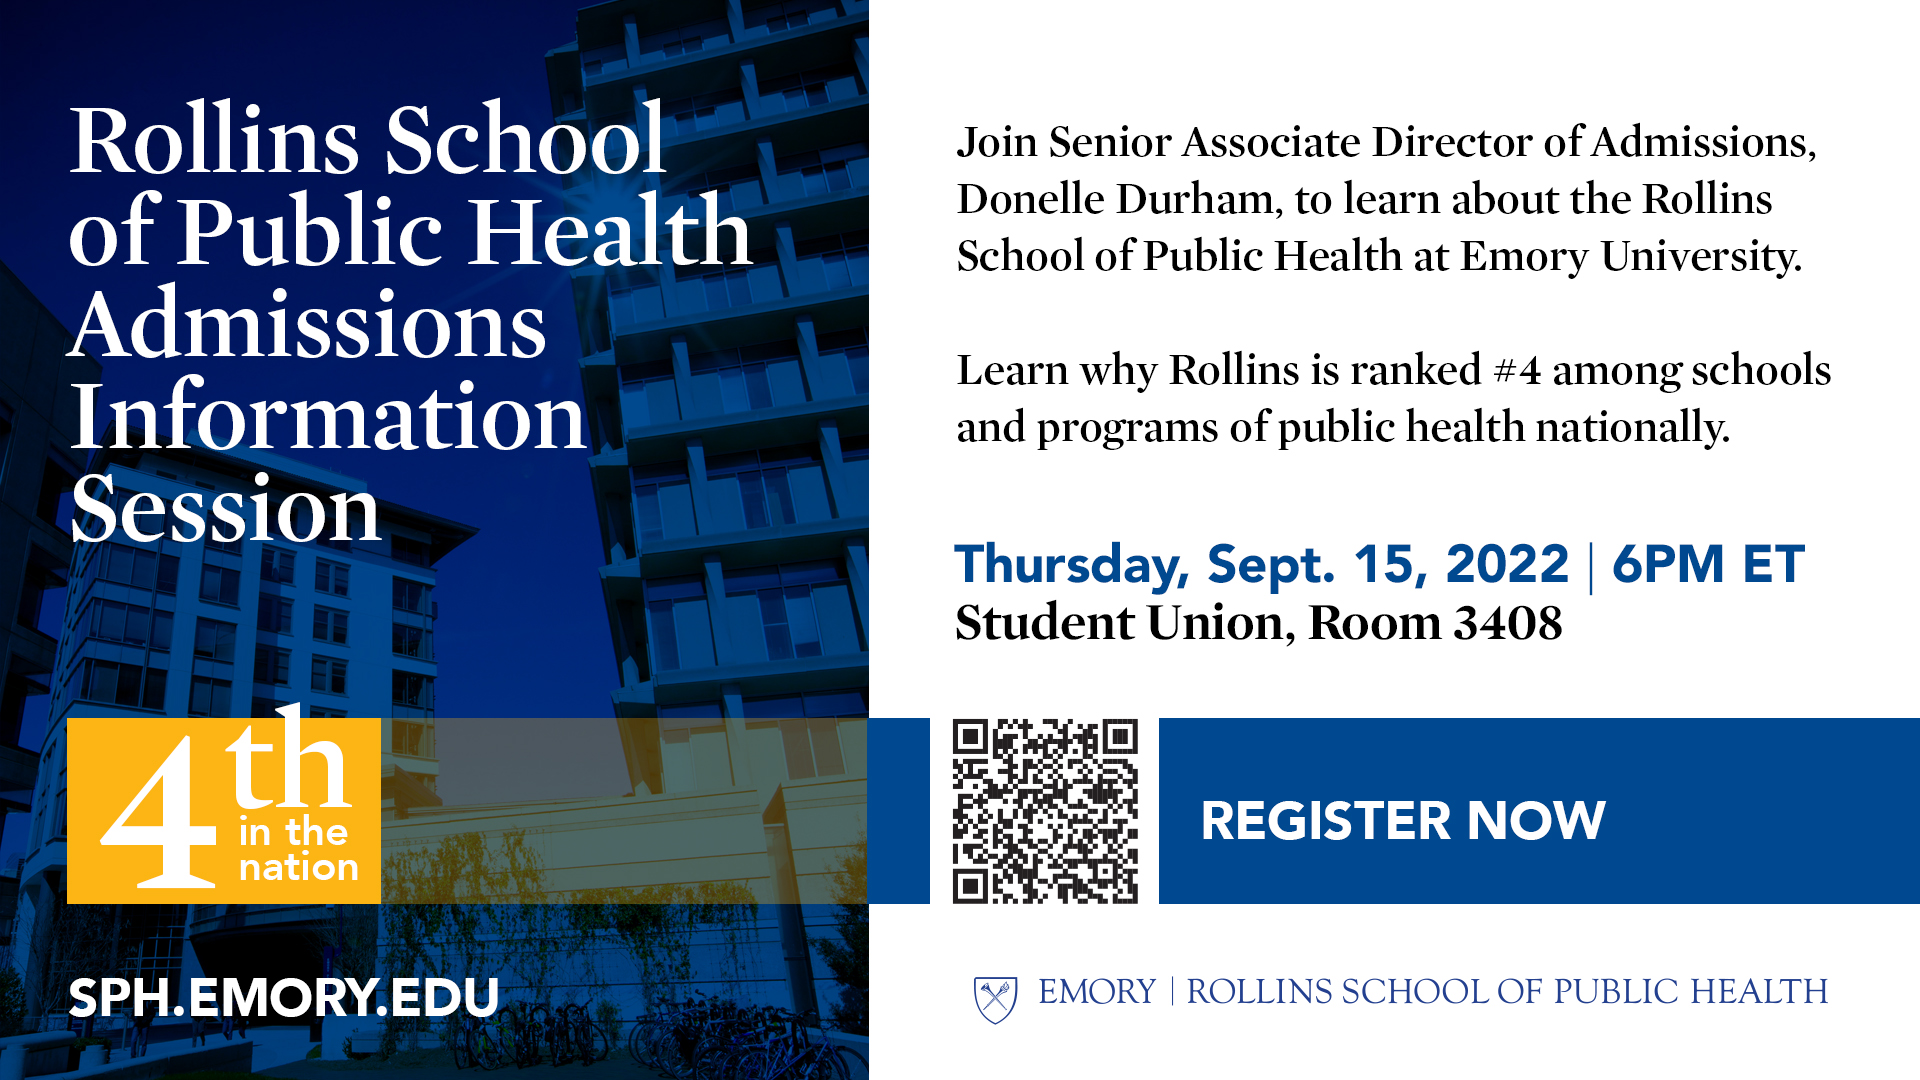 Rollins School of Public Health Admissions Information Session